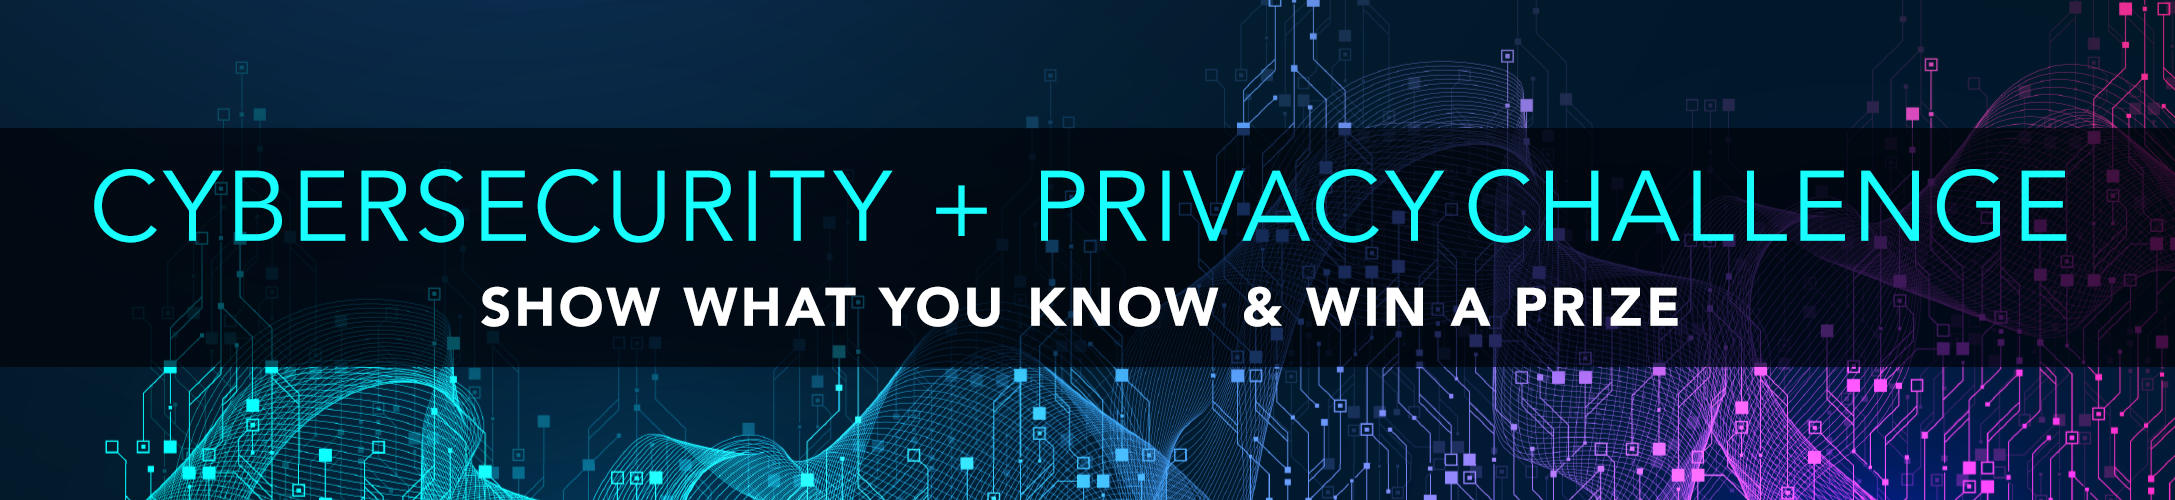 Header graphic in navy with aqua and white lettering that says Cybersecurity + Privacy Challenge Show What You Know and Win a Prize